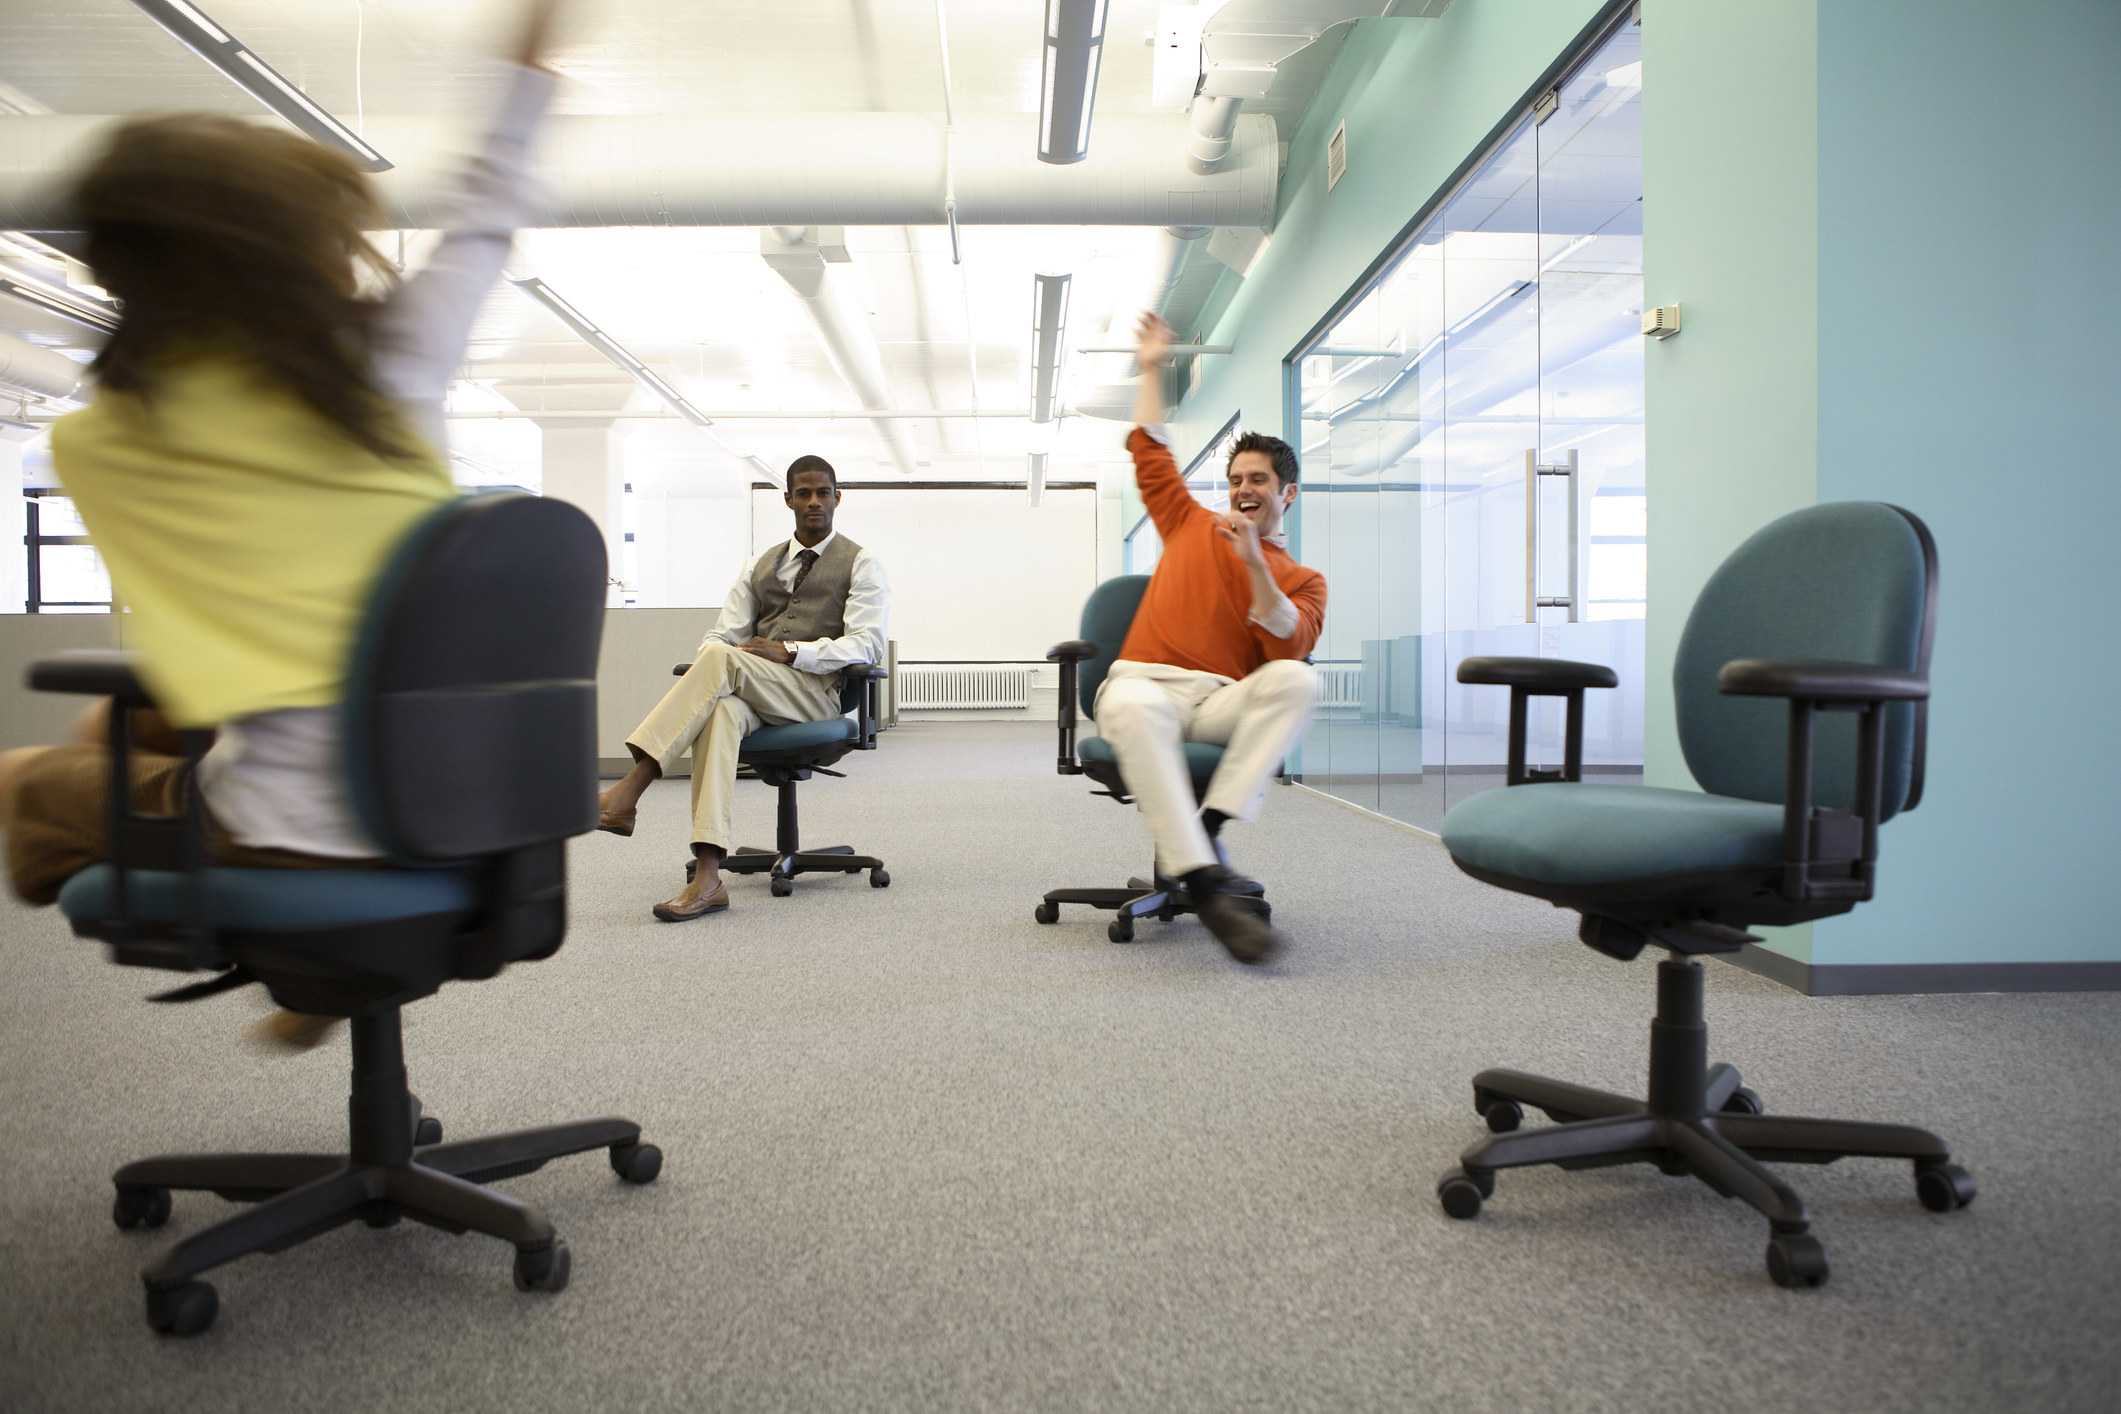 Workers spinning in chairs in office